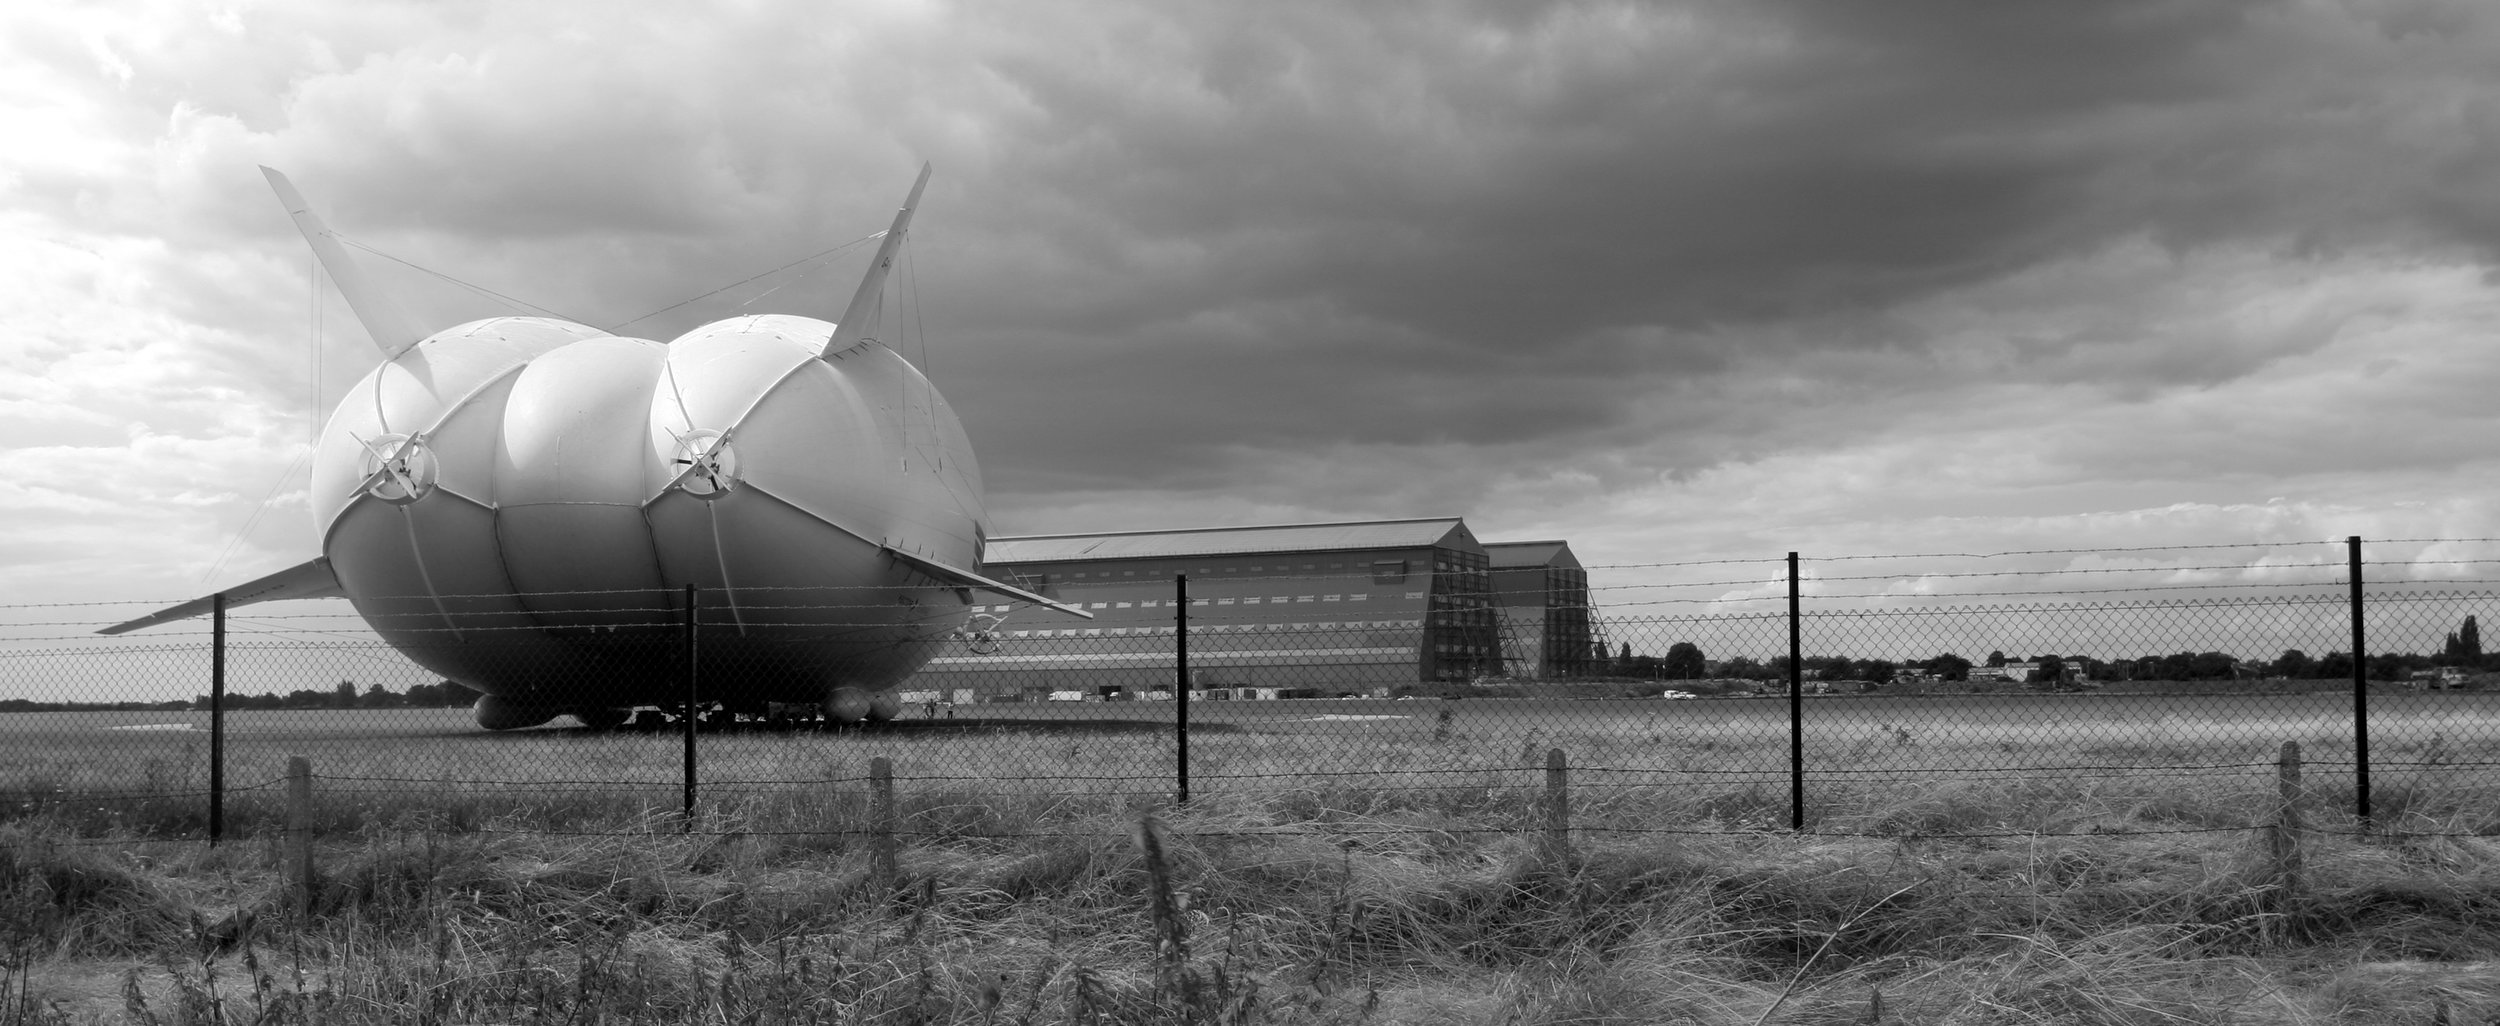  "  Storm clouds  "  The Airlander at Cardington  Limited edition of 100 prints signed and numbered  Comes complete with a neutral coloured mount ready for framing       